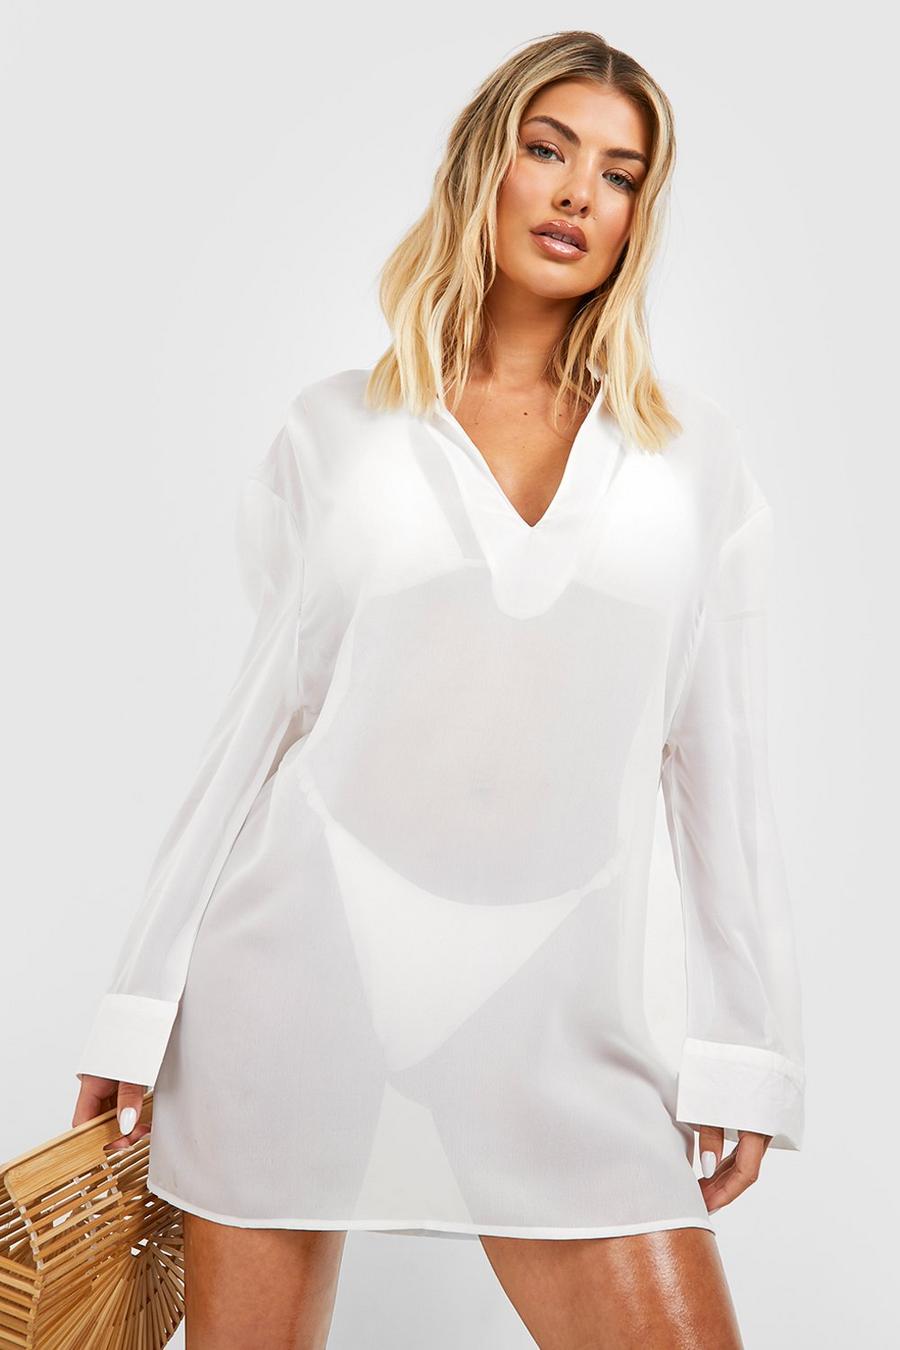 White Essential Beach Cover-up Tunic